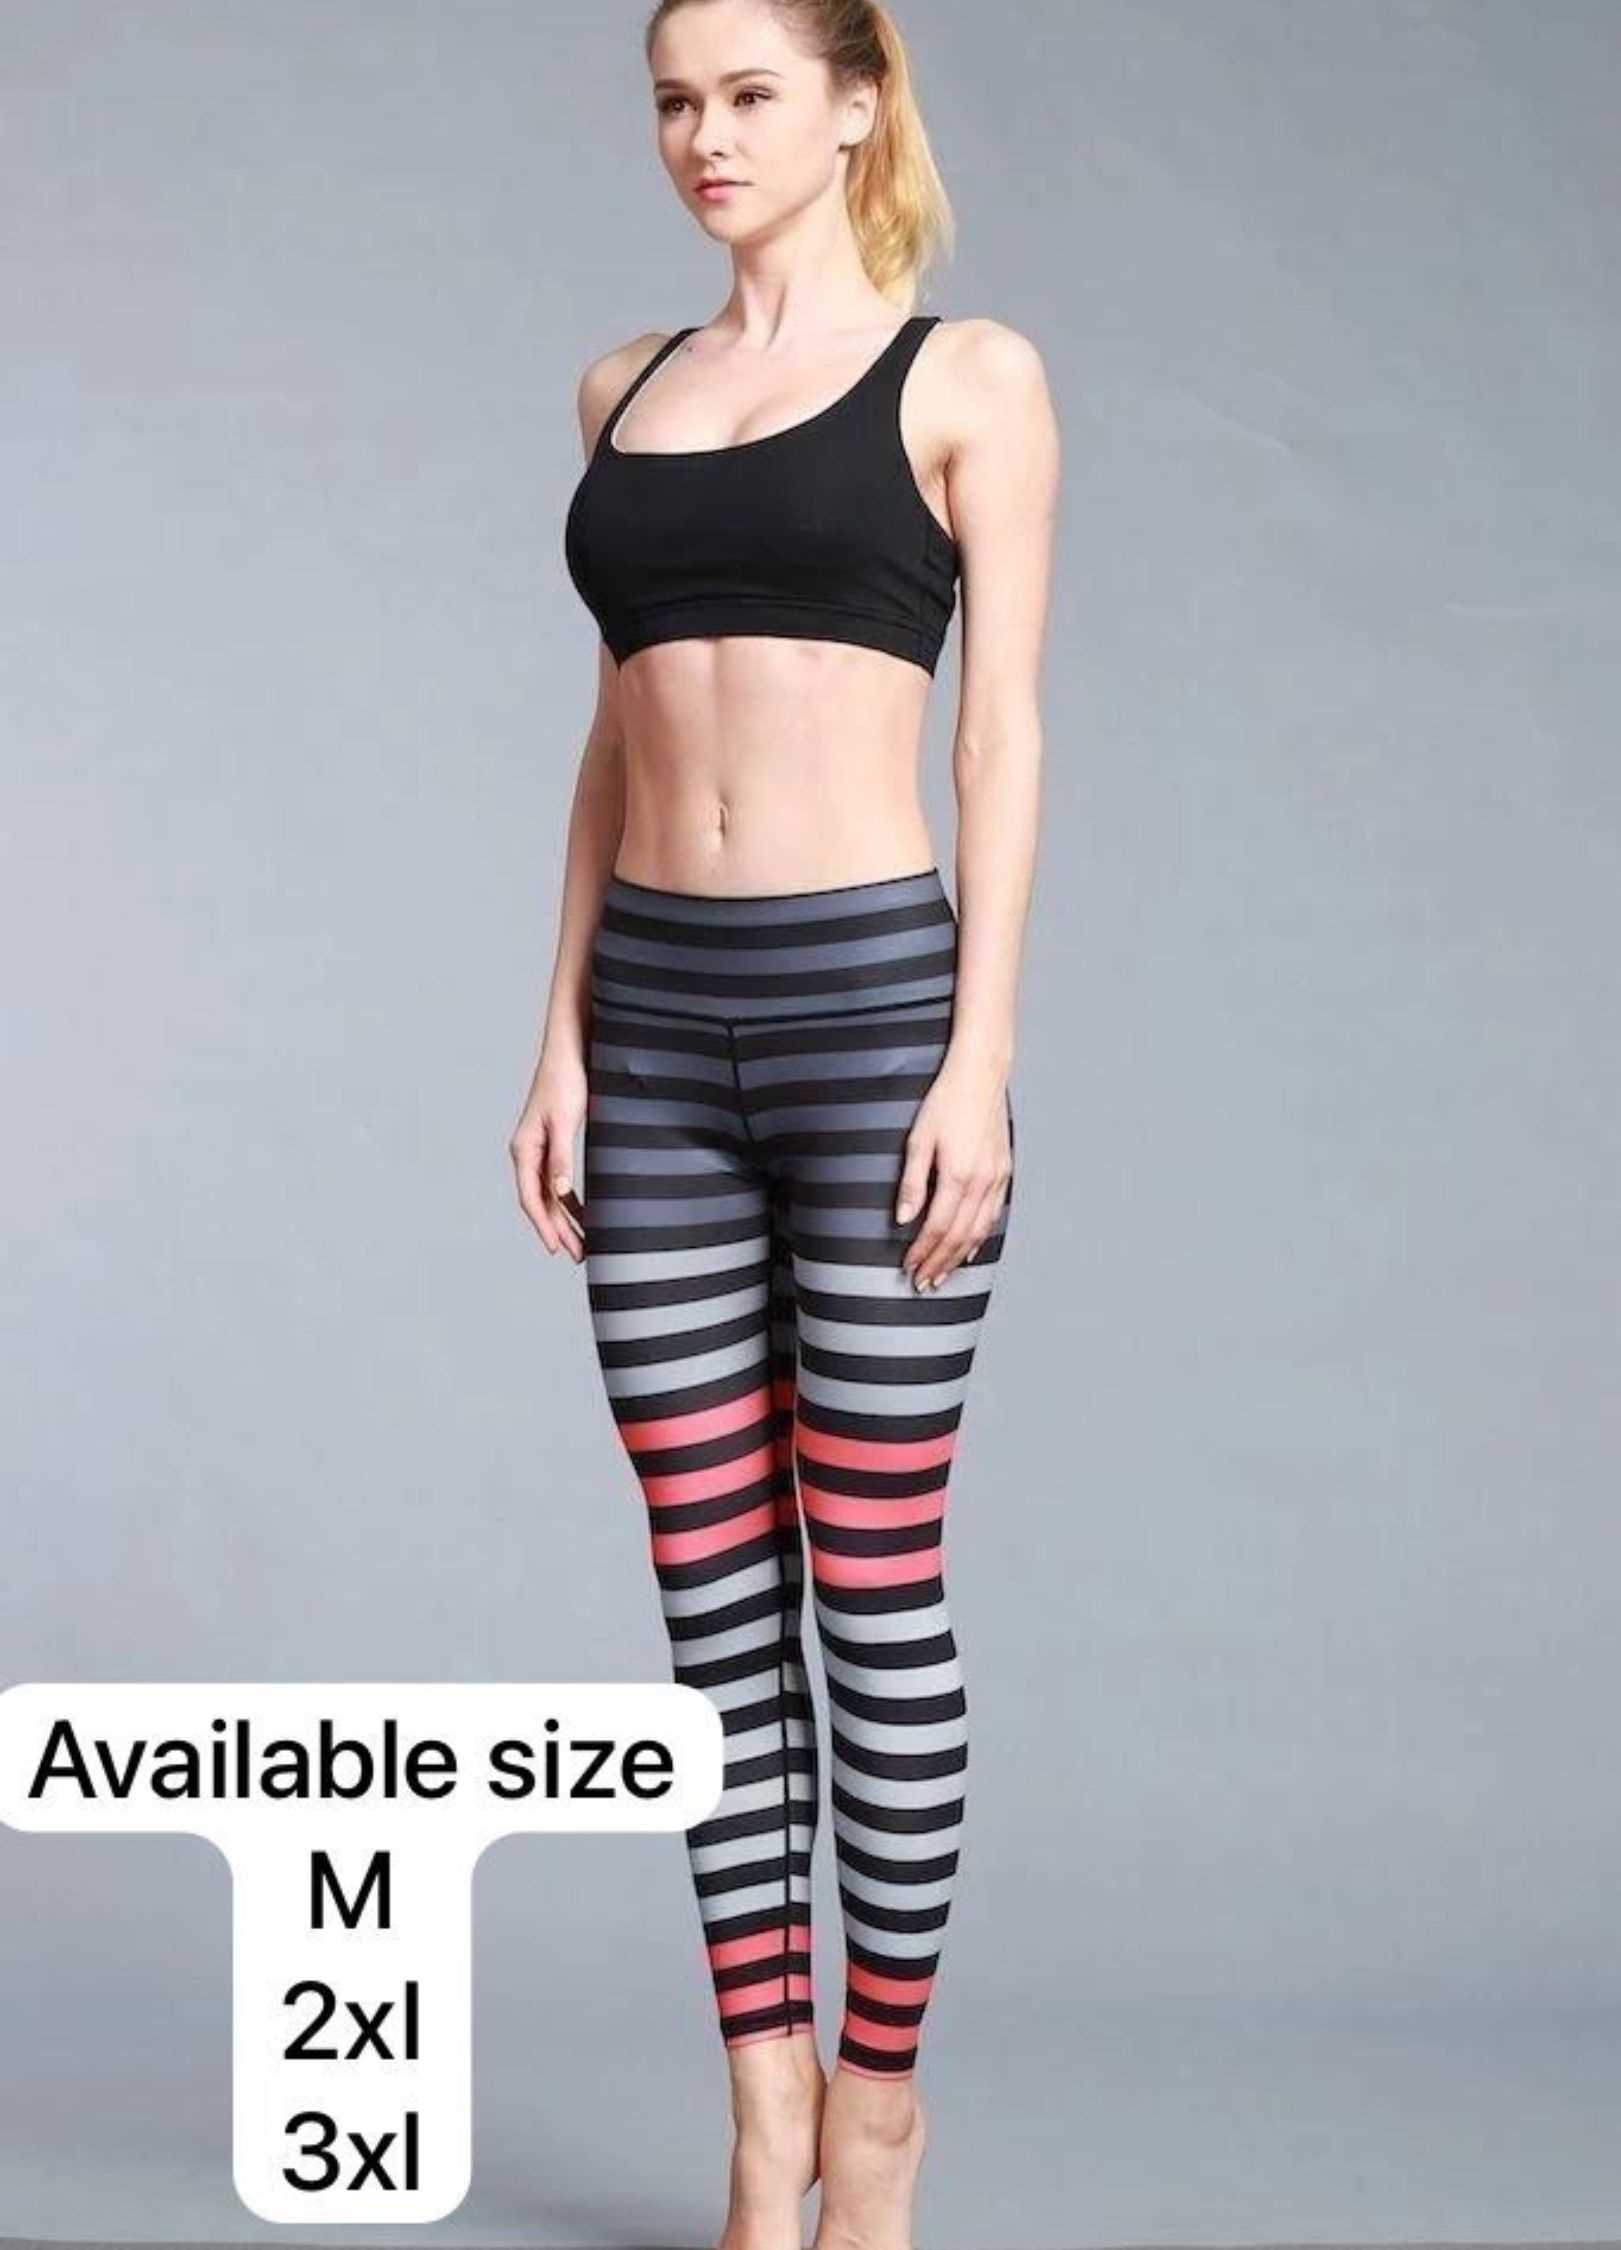 Shop Now Swara Cigaar Lycra Stretchable Pant Collection at  wholesaletextile.in